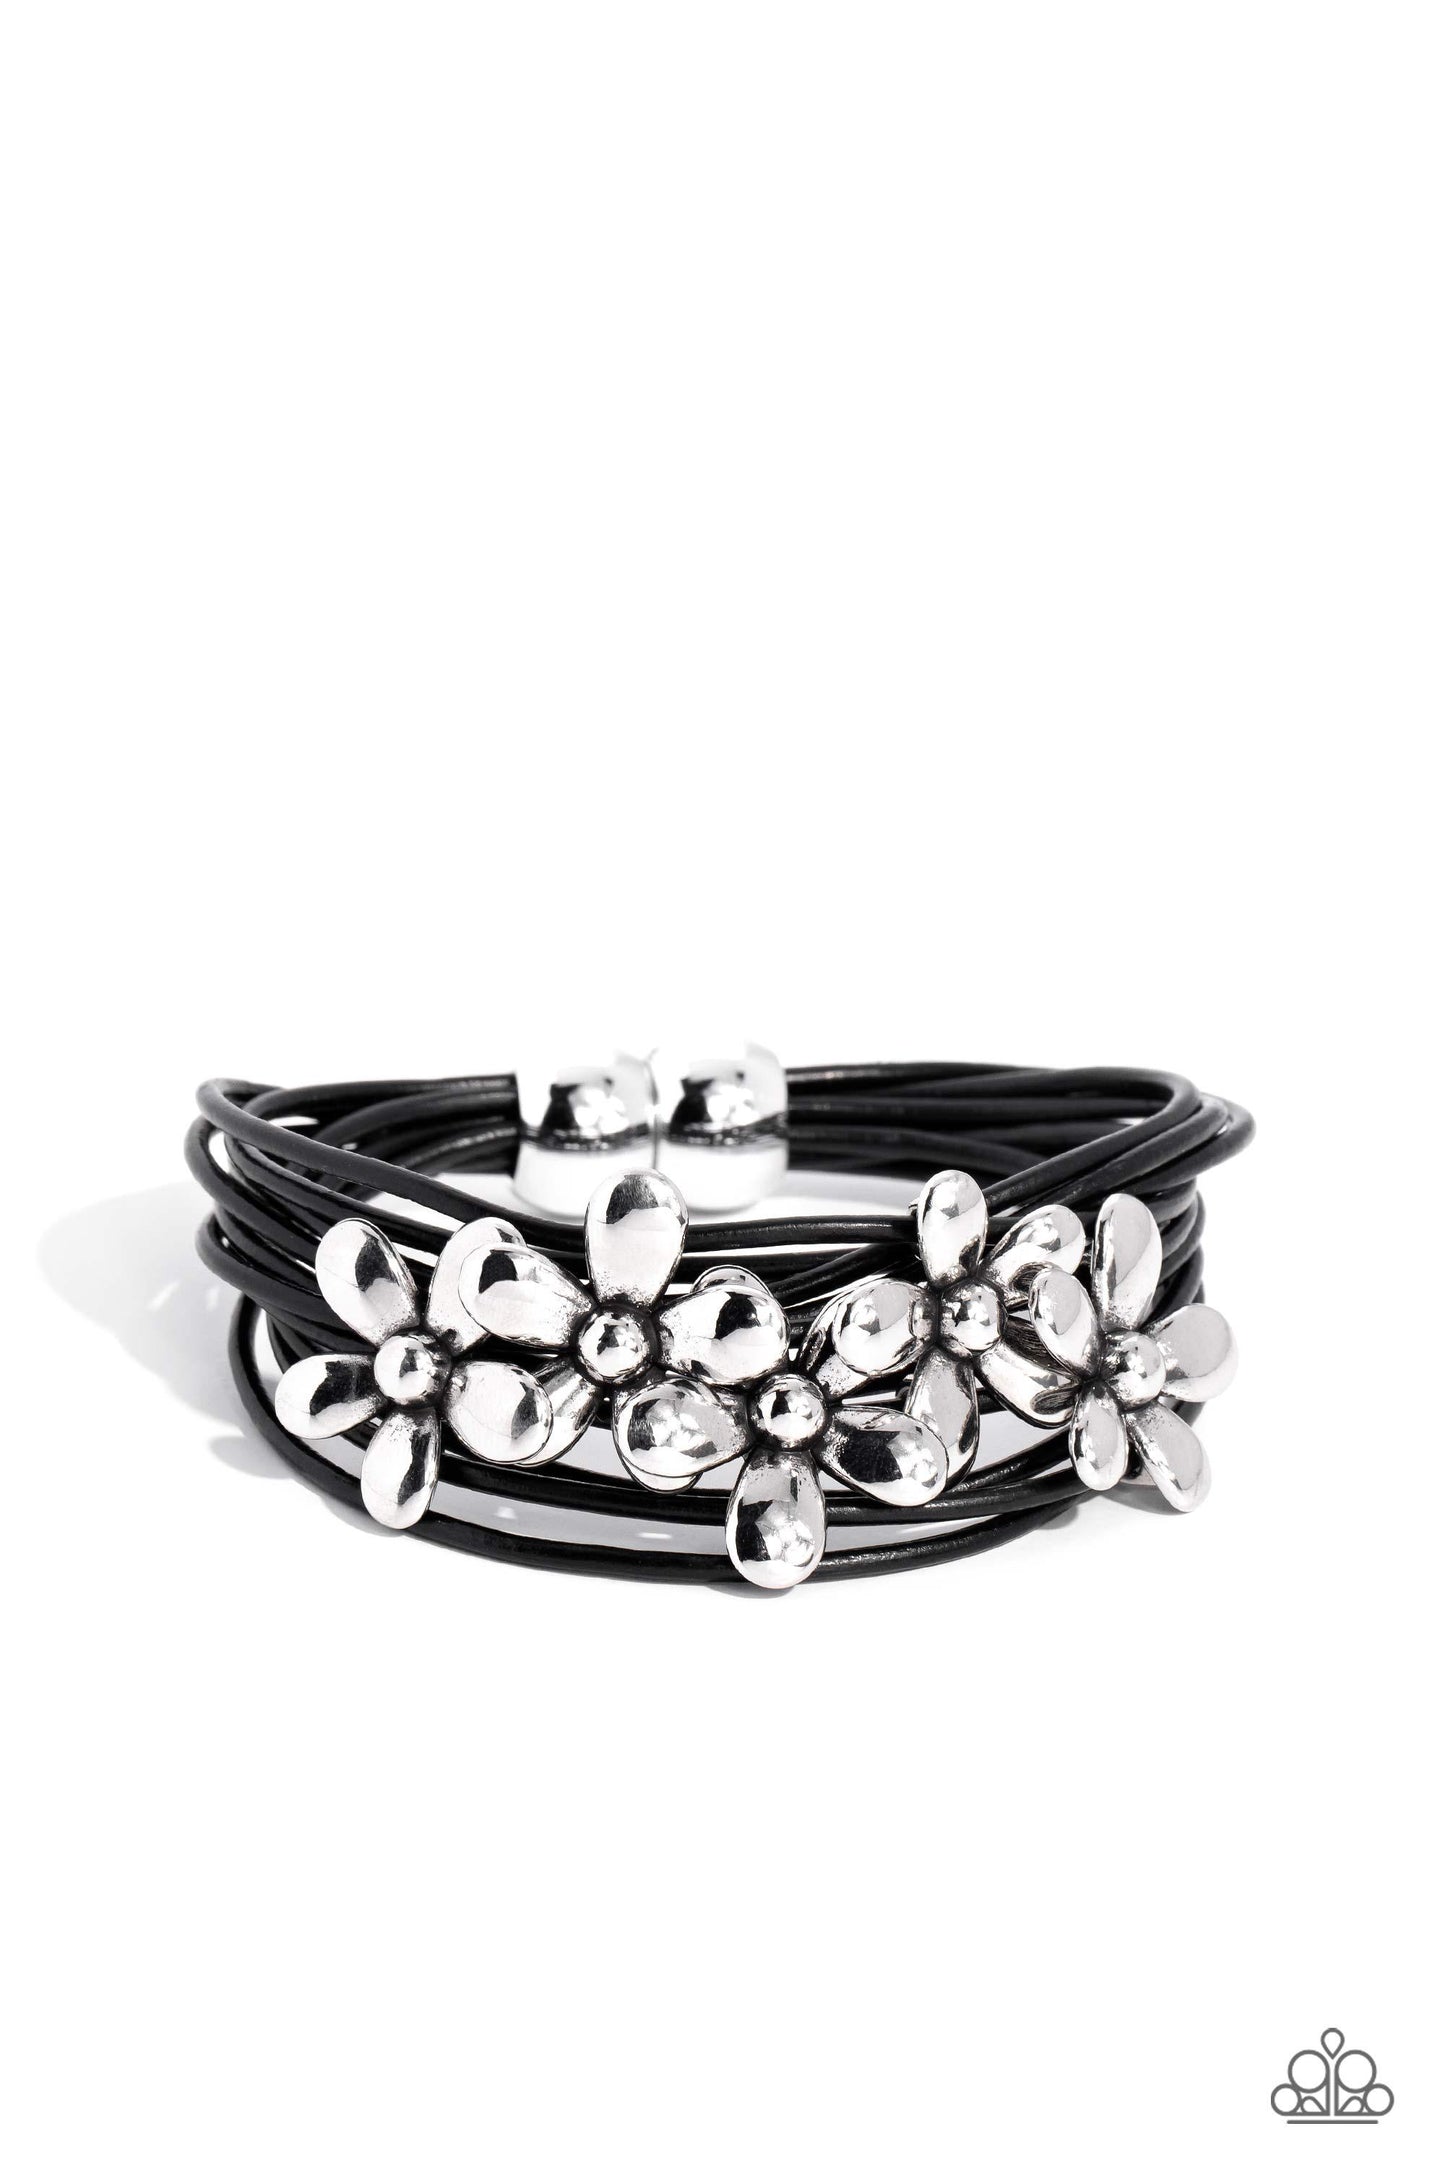 Paparazzi Accessories - Here Comes the BLOOM - Black Bracelet - Bling by JessieK